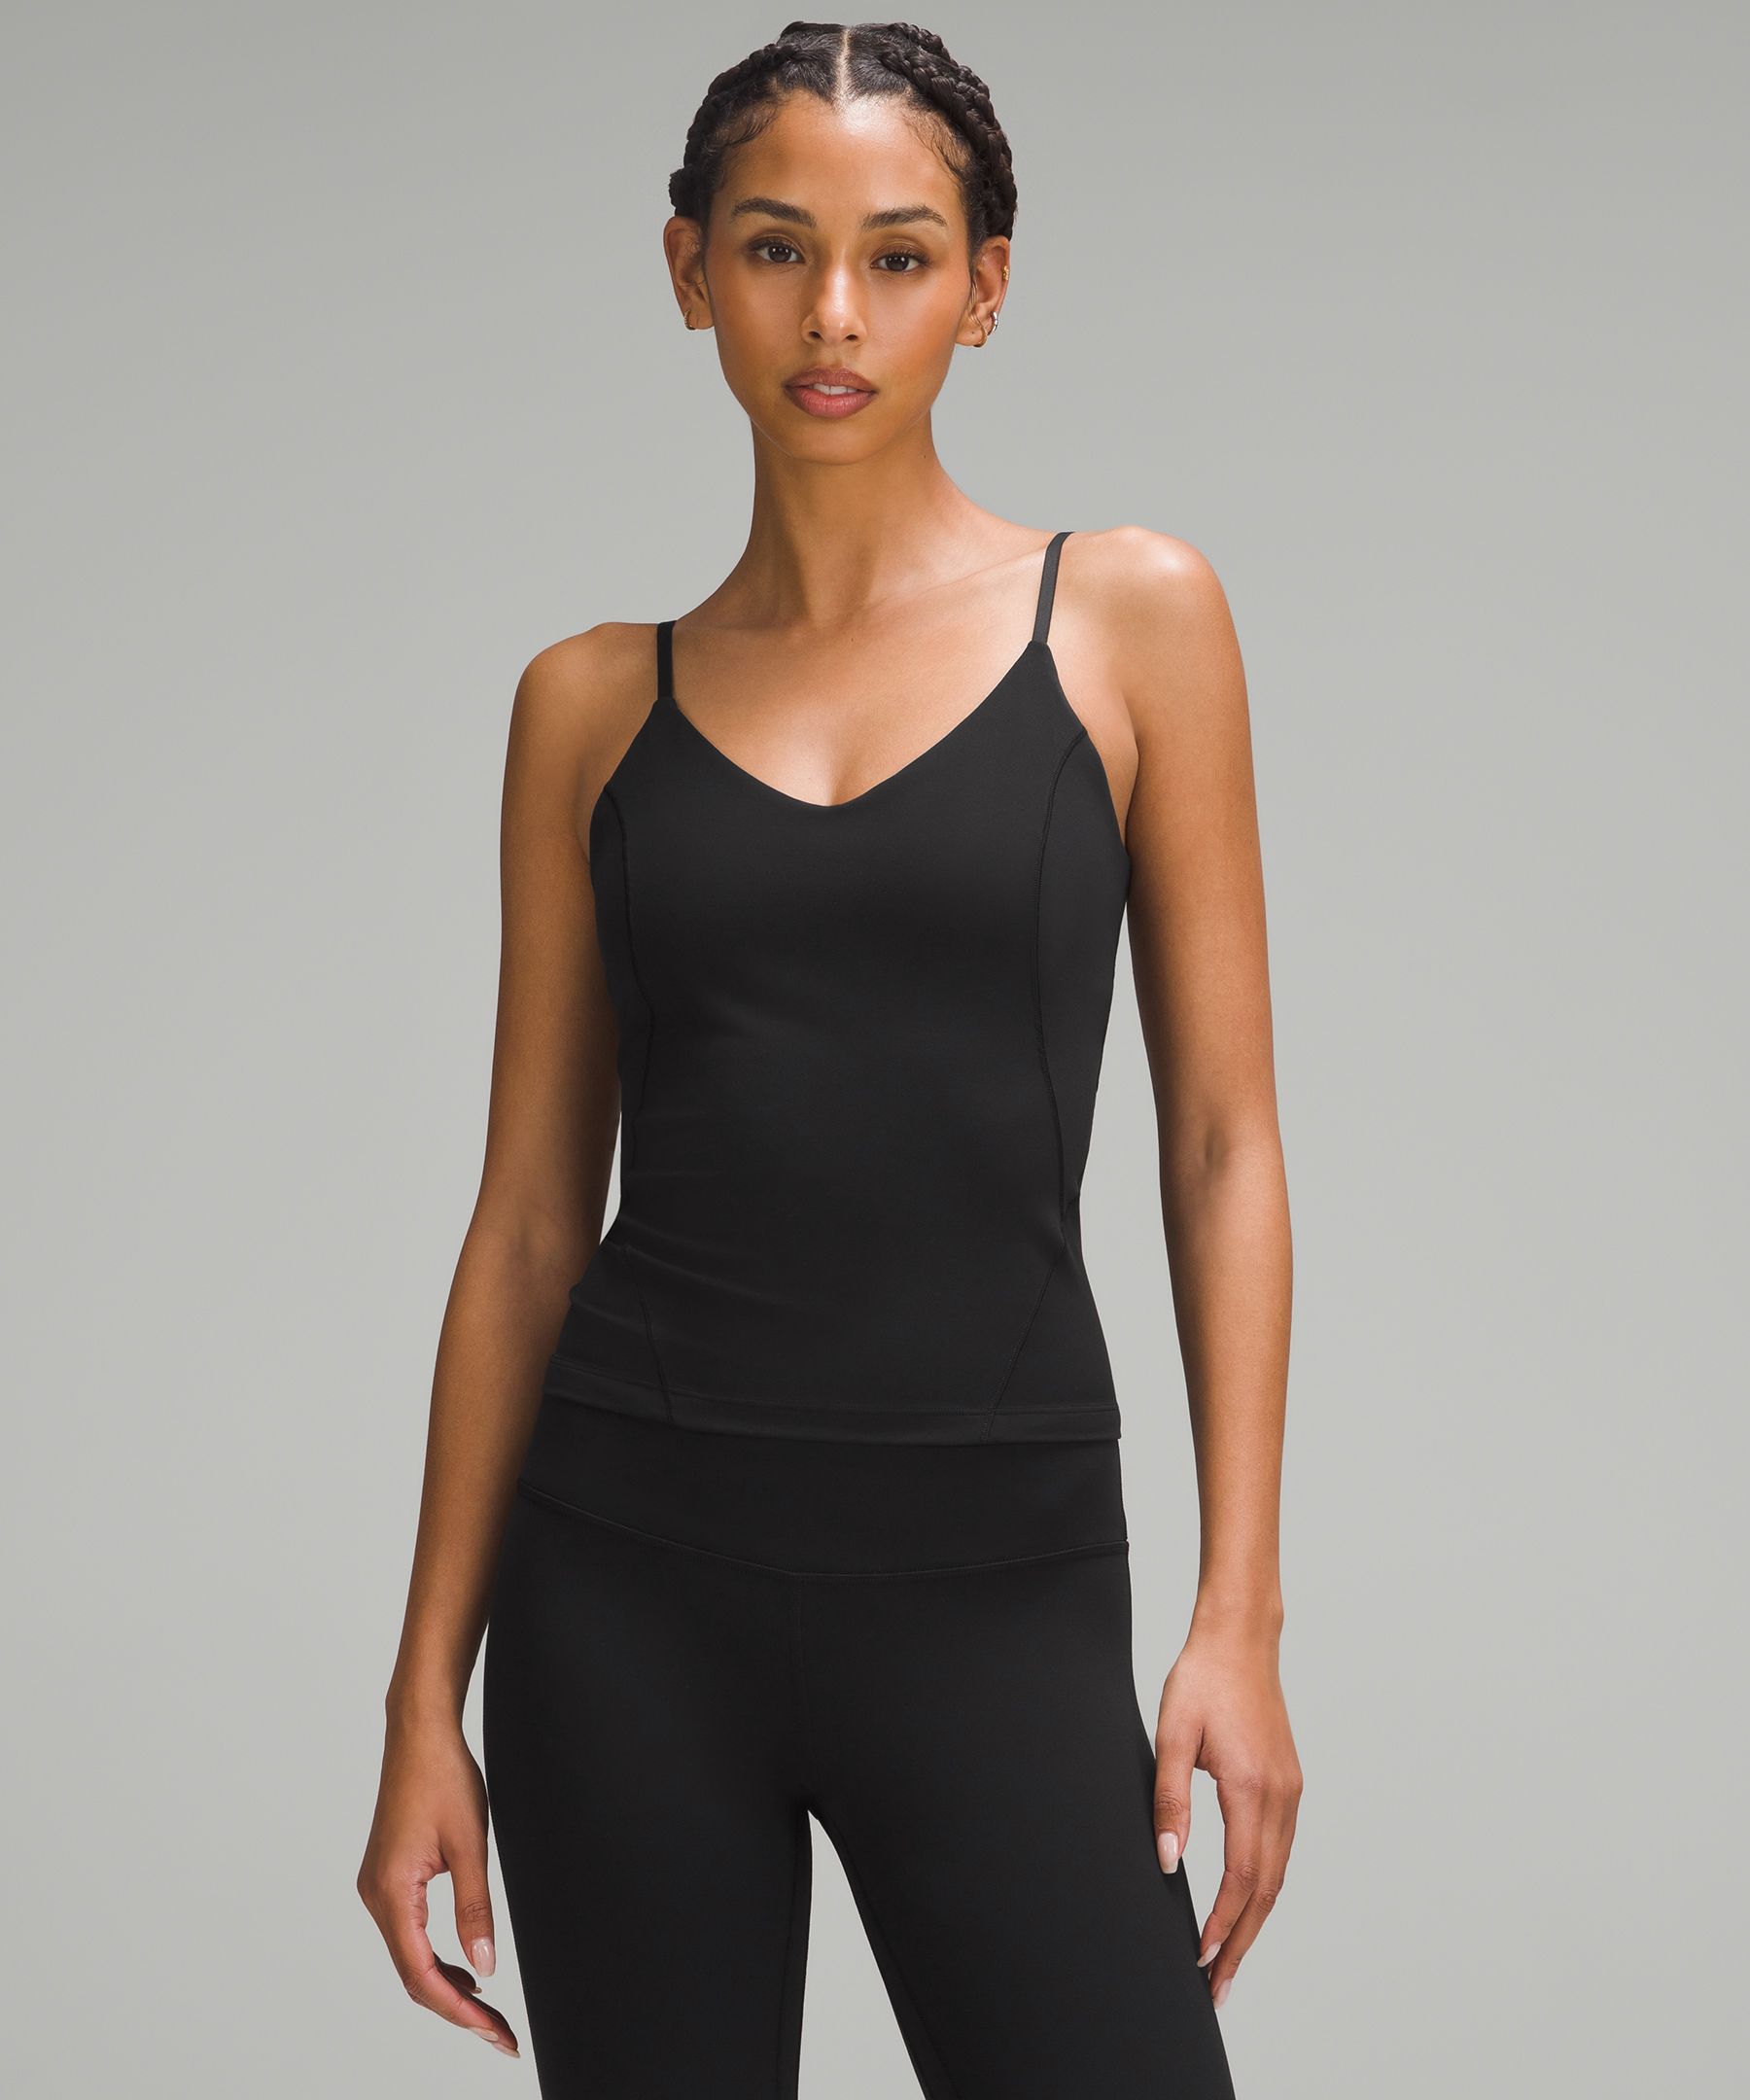 Lululemon Align Tank Multiple Size 0 - $50 (26% Off Retail) - From Cece